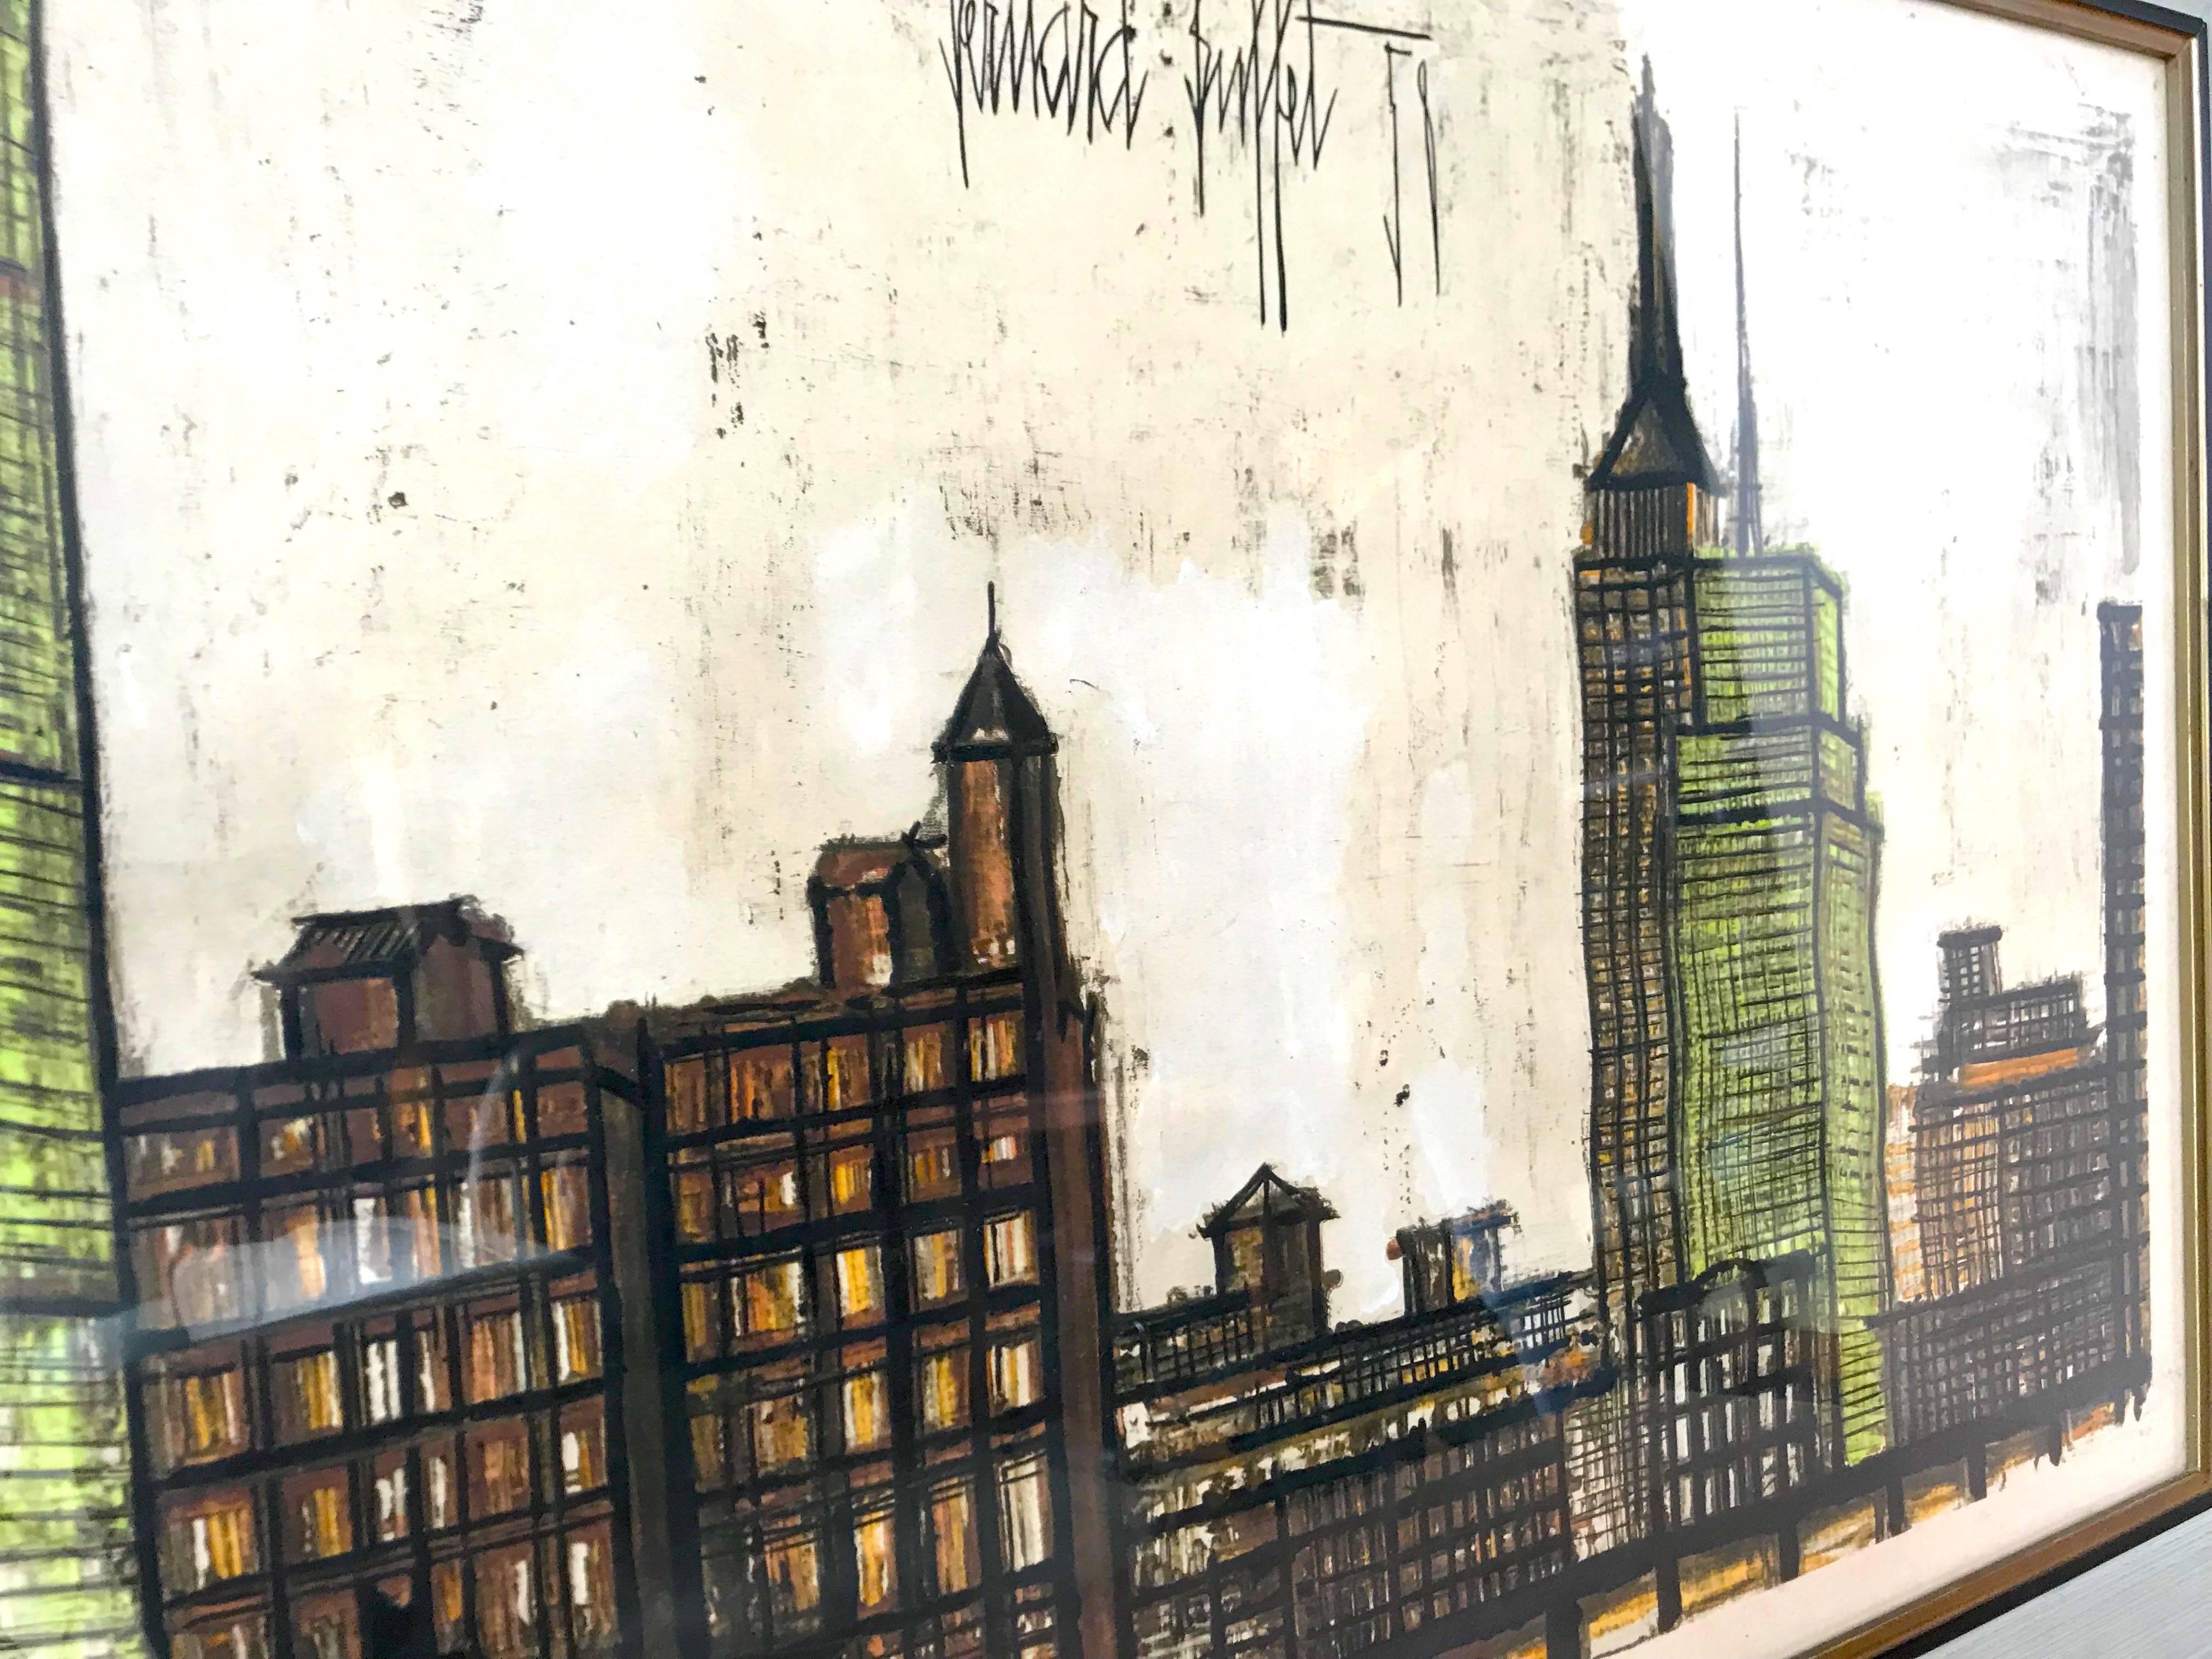 This powerful cityscape you are about to bid on is a fabulous 1958 hand-colored lithograph by the talented & LISTED French artist Bernard Buffet (1928-1999). Strong vertical and horizontal lines criss-cross one another, building this energetic urban